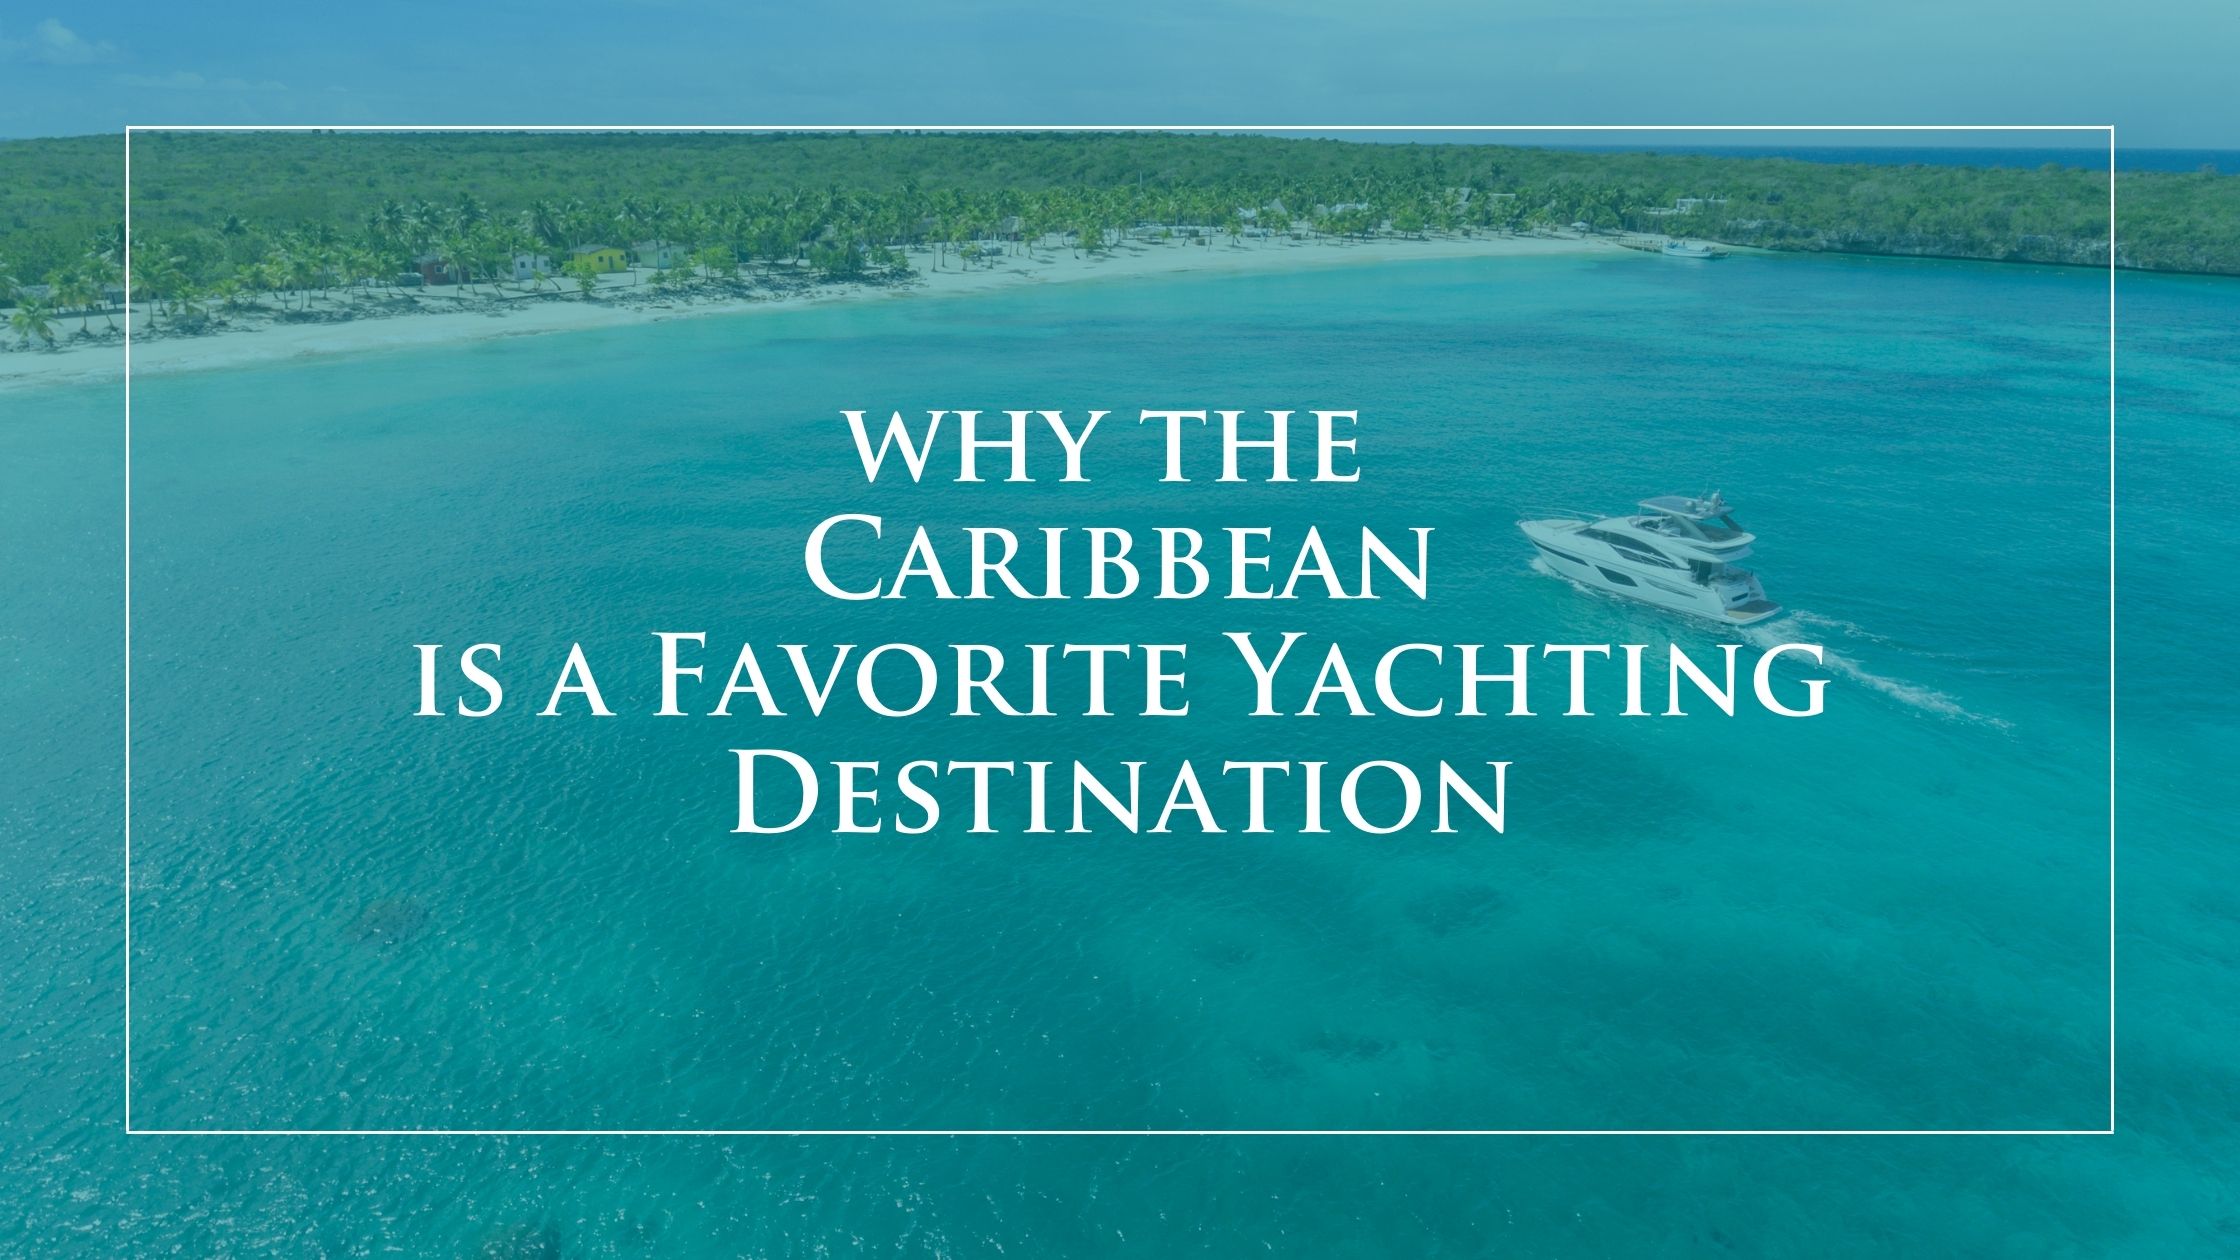 5 Reasons the Caribbean is a Favorite Yachting Destination